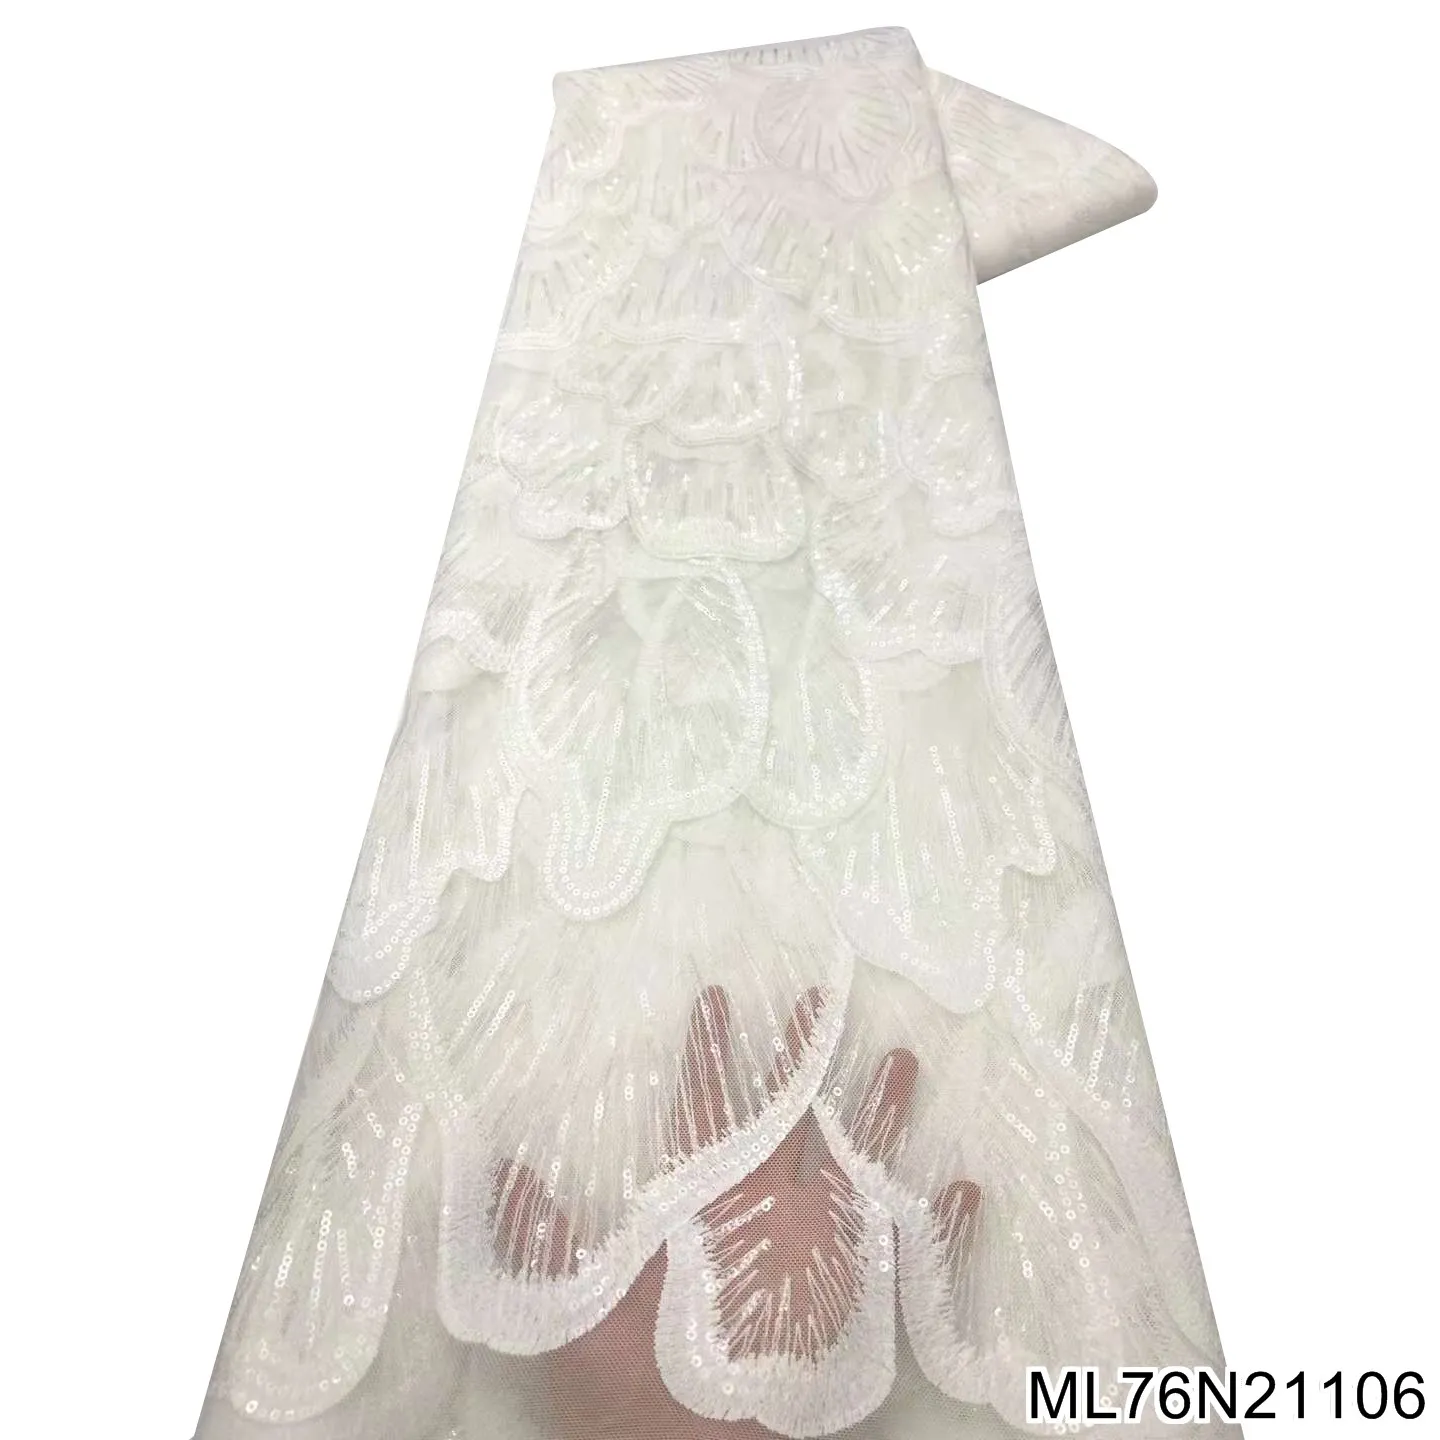 2022 New White Tulle Lace Fabric with Sequins African Lace French Embroidery 5 Yard Net Lace for Wedding Dress ML76N211